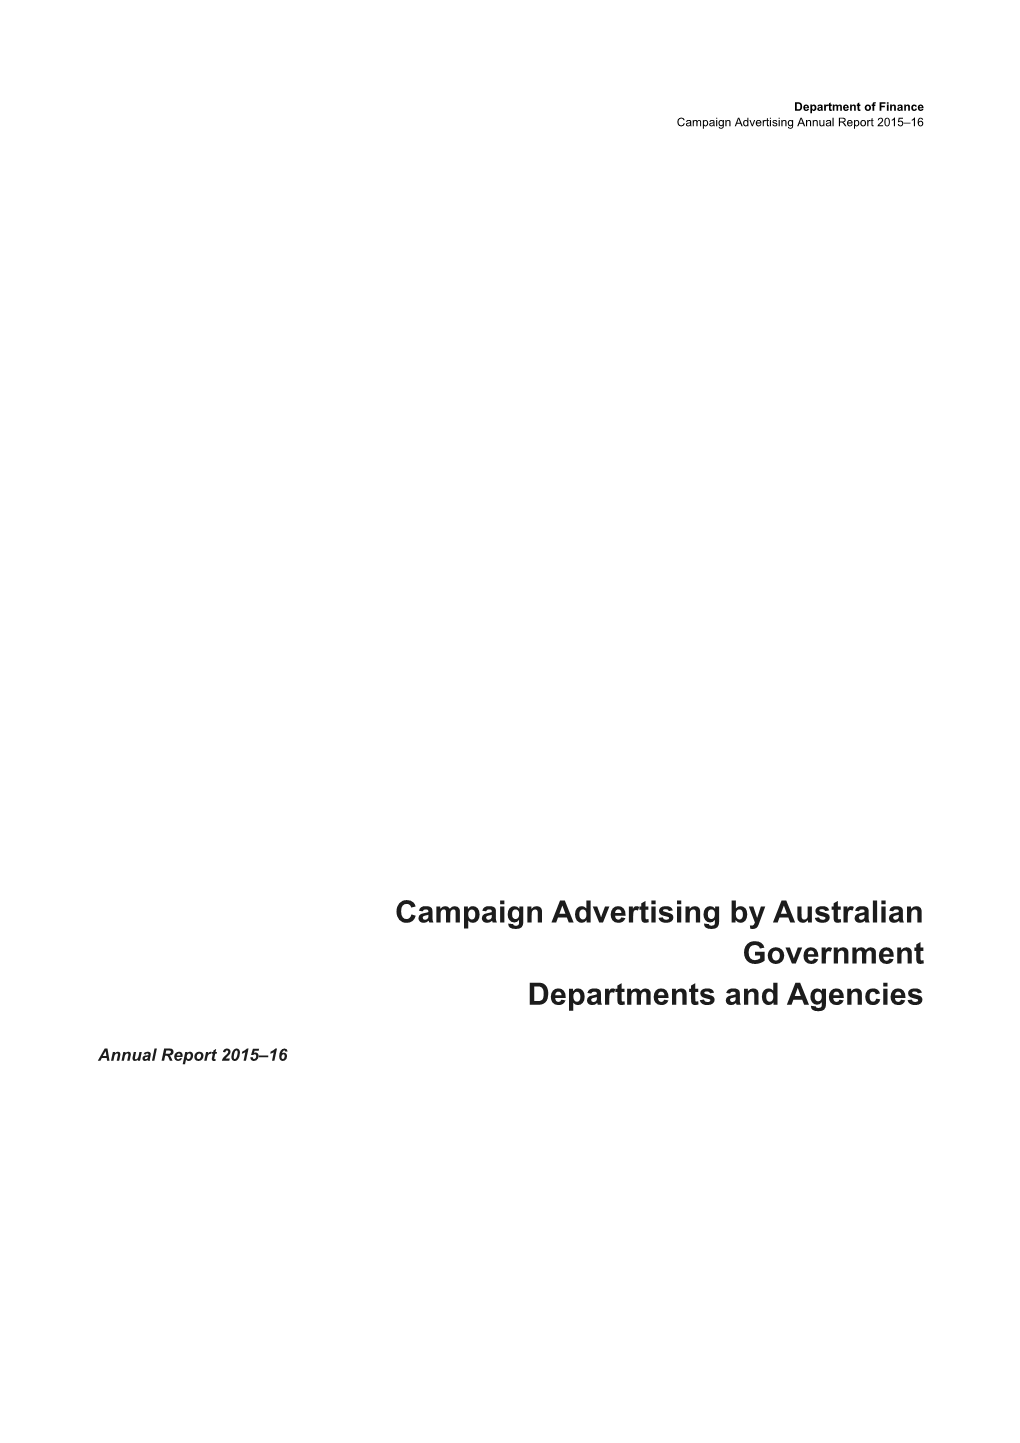 Campaign Advertising by Australian Government Departments and Agencies - Annual Report 2015-16